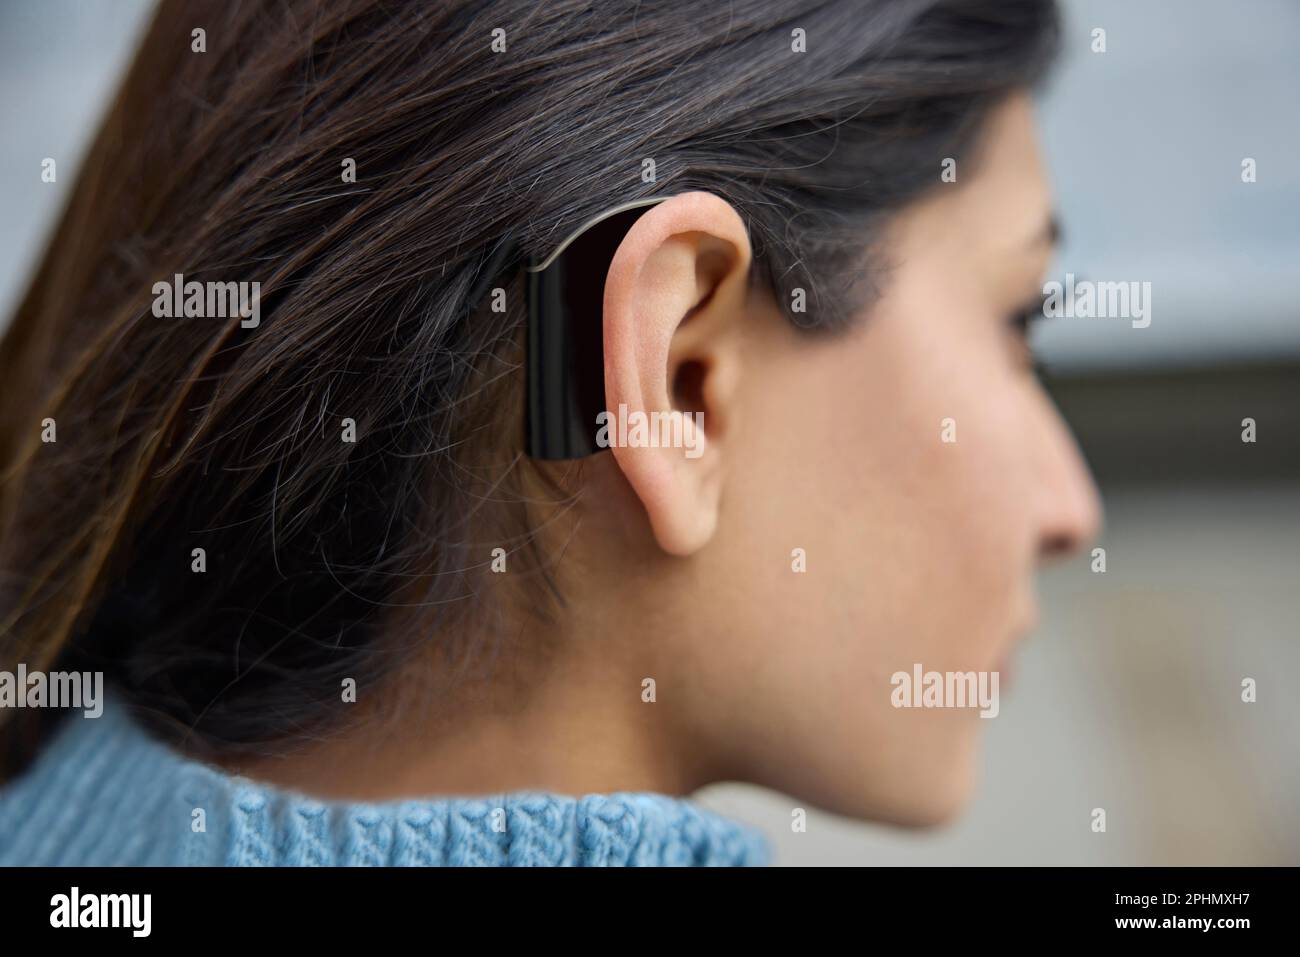 Close Up Of Young Woman Wearing Behind The Ear Hearing Device Or Aid Stock Photo